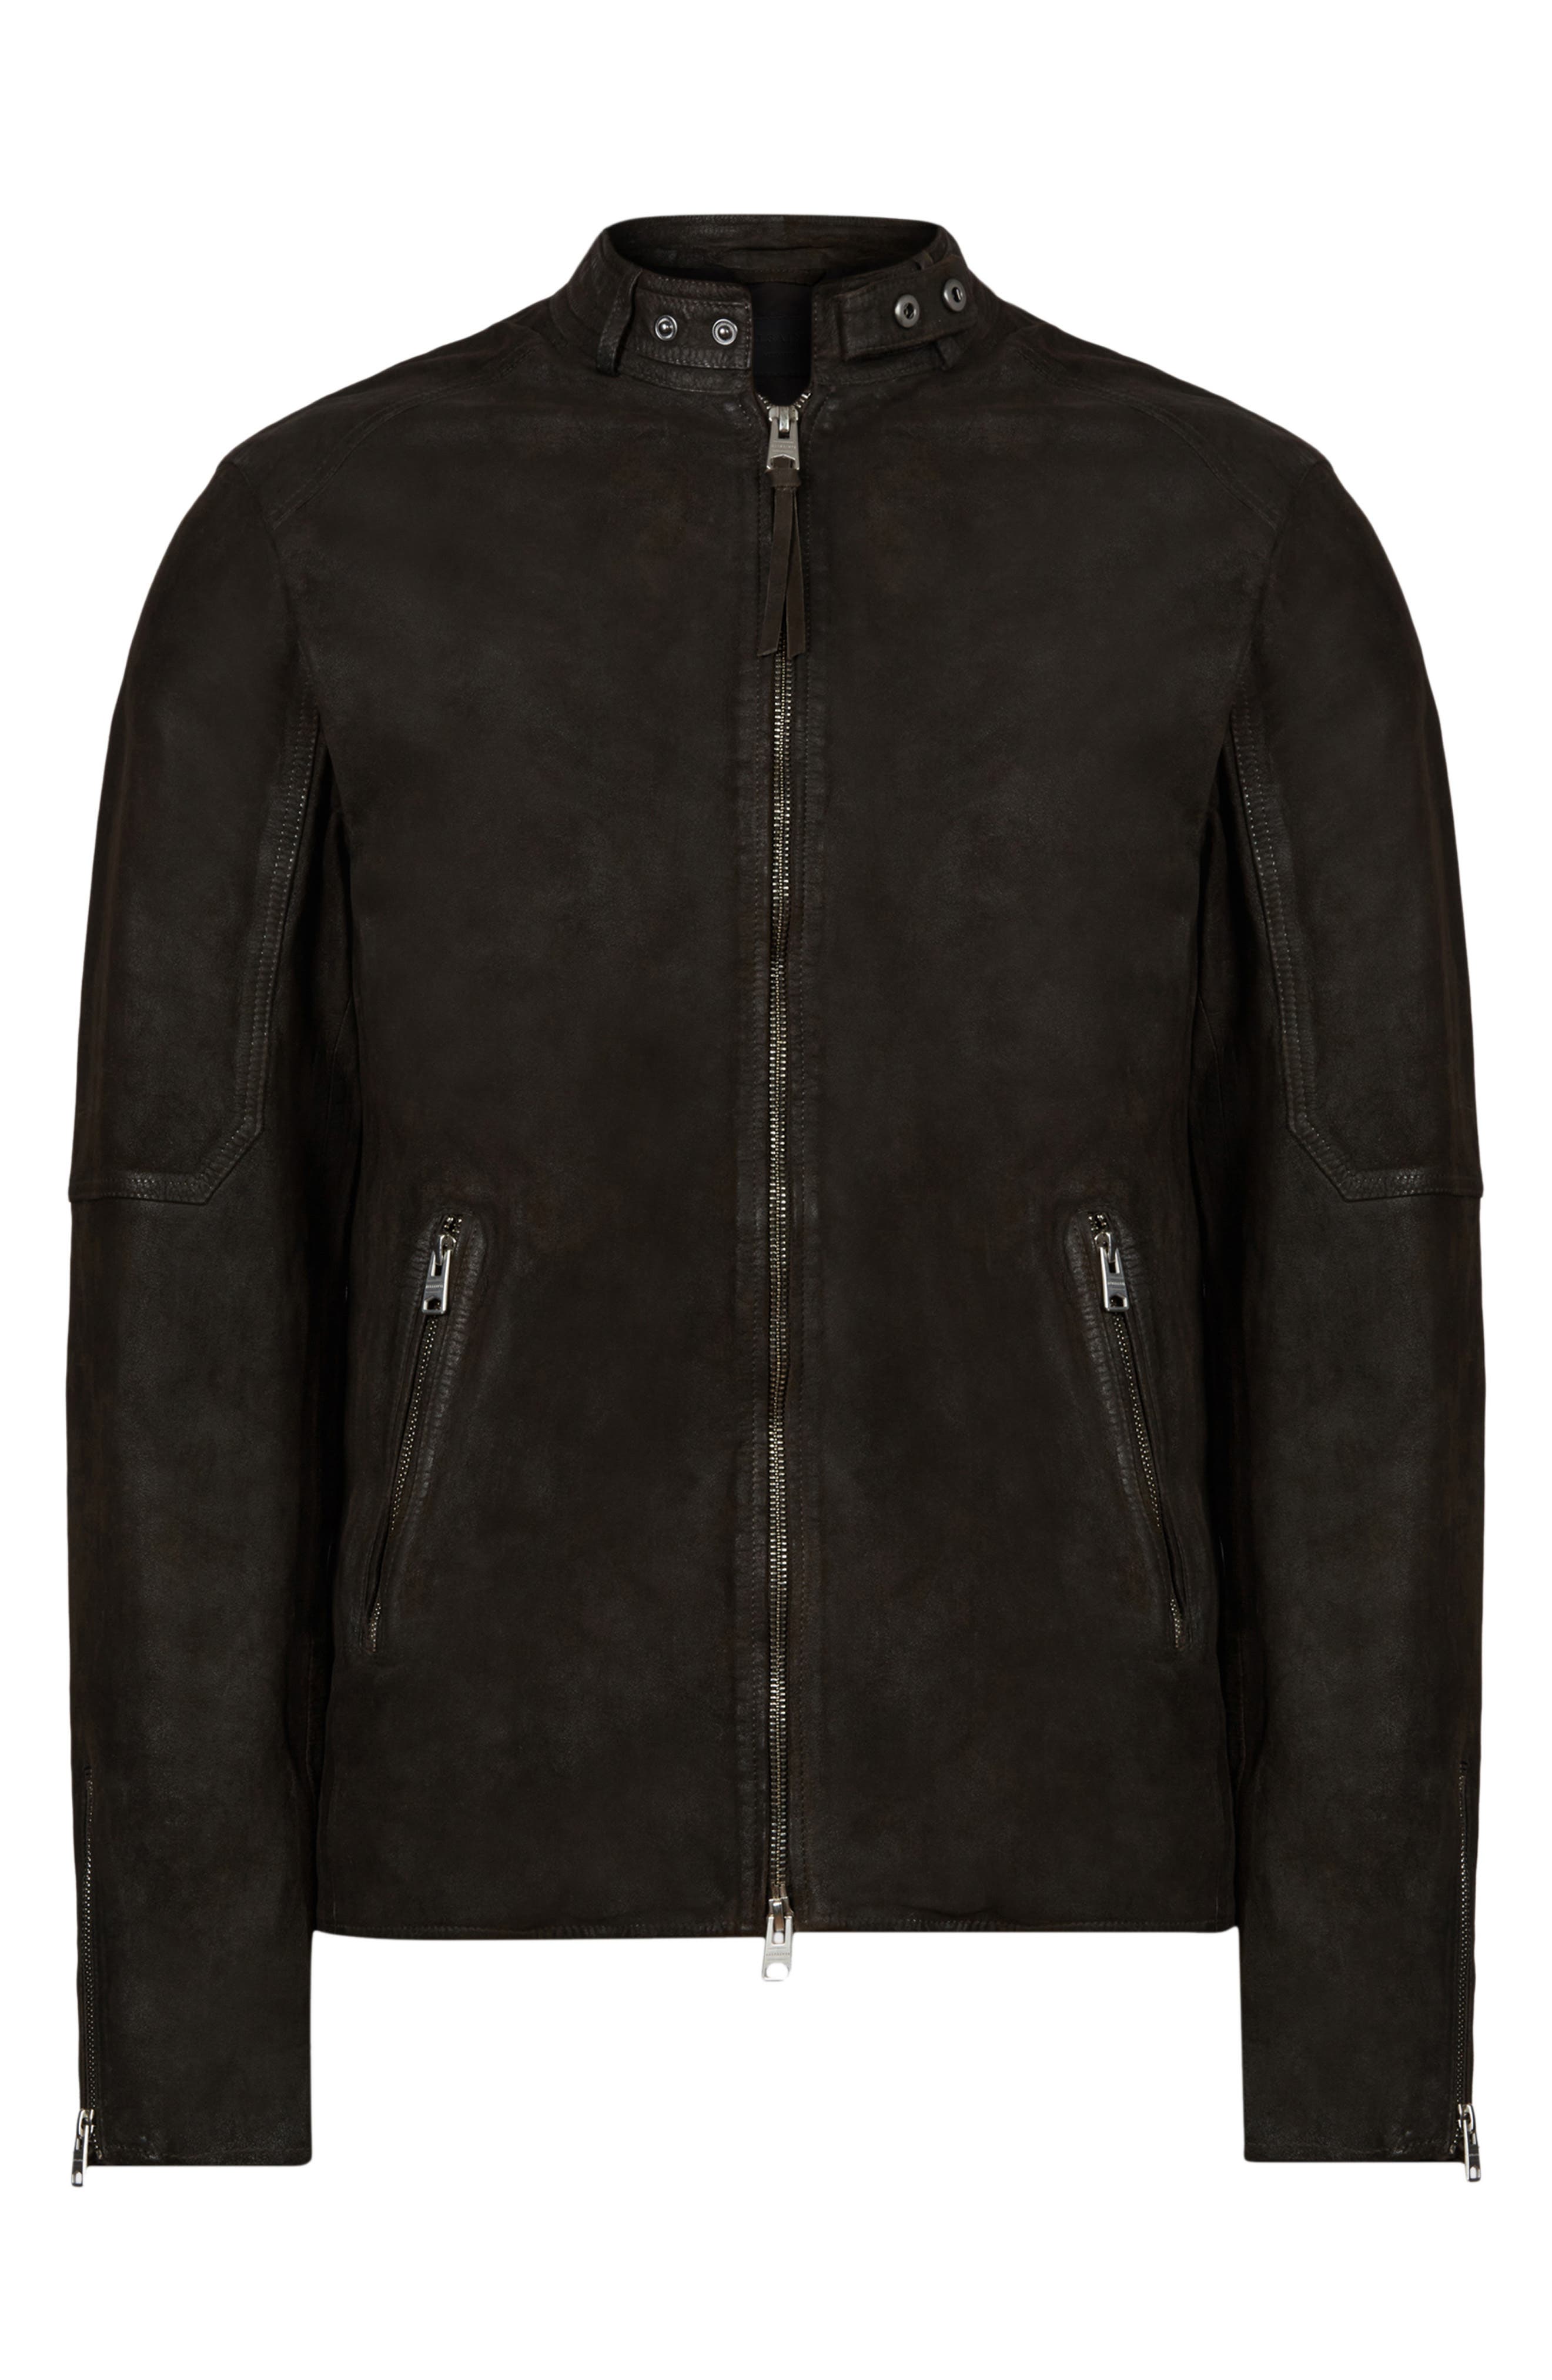 AllSaints Cora Leather Jacket in Black for Men Mens Clothing Jackets Leather jackets 